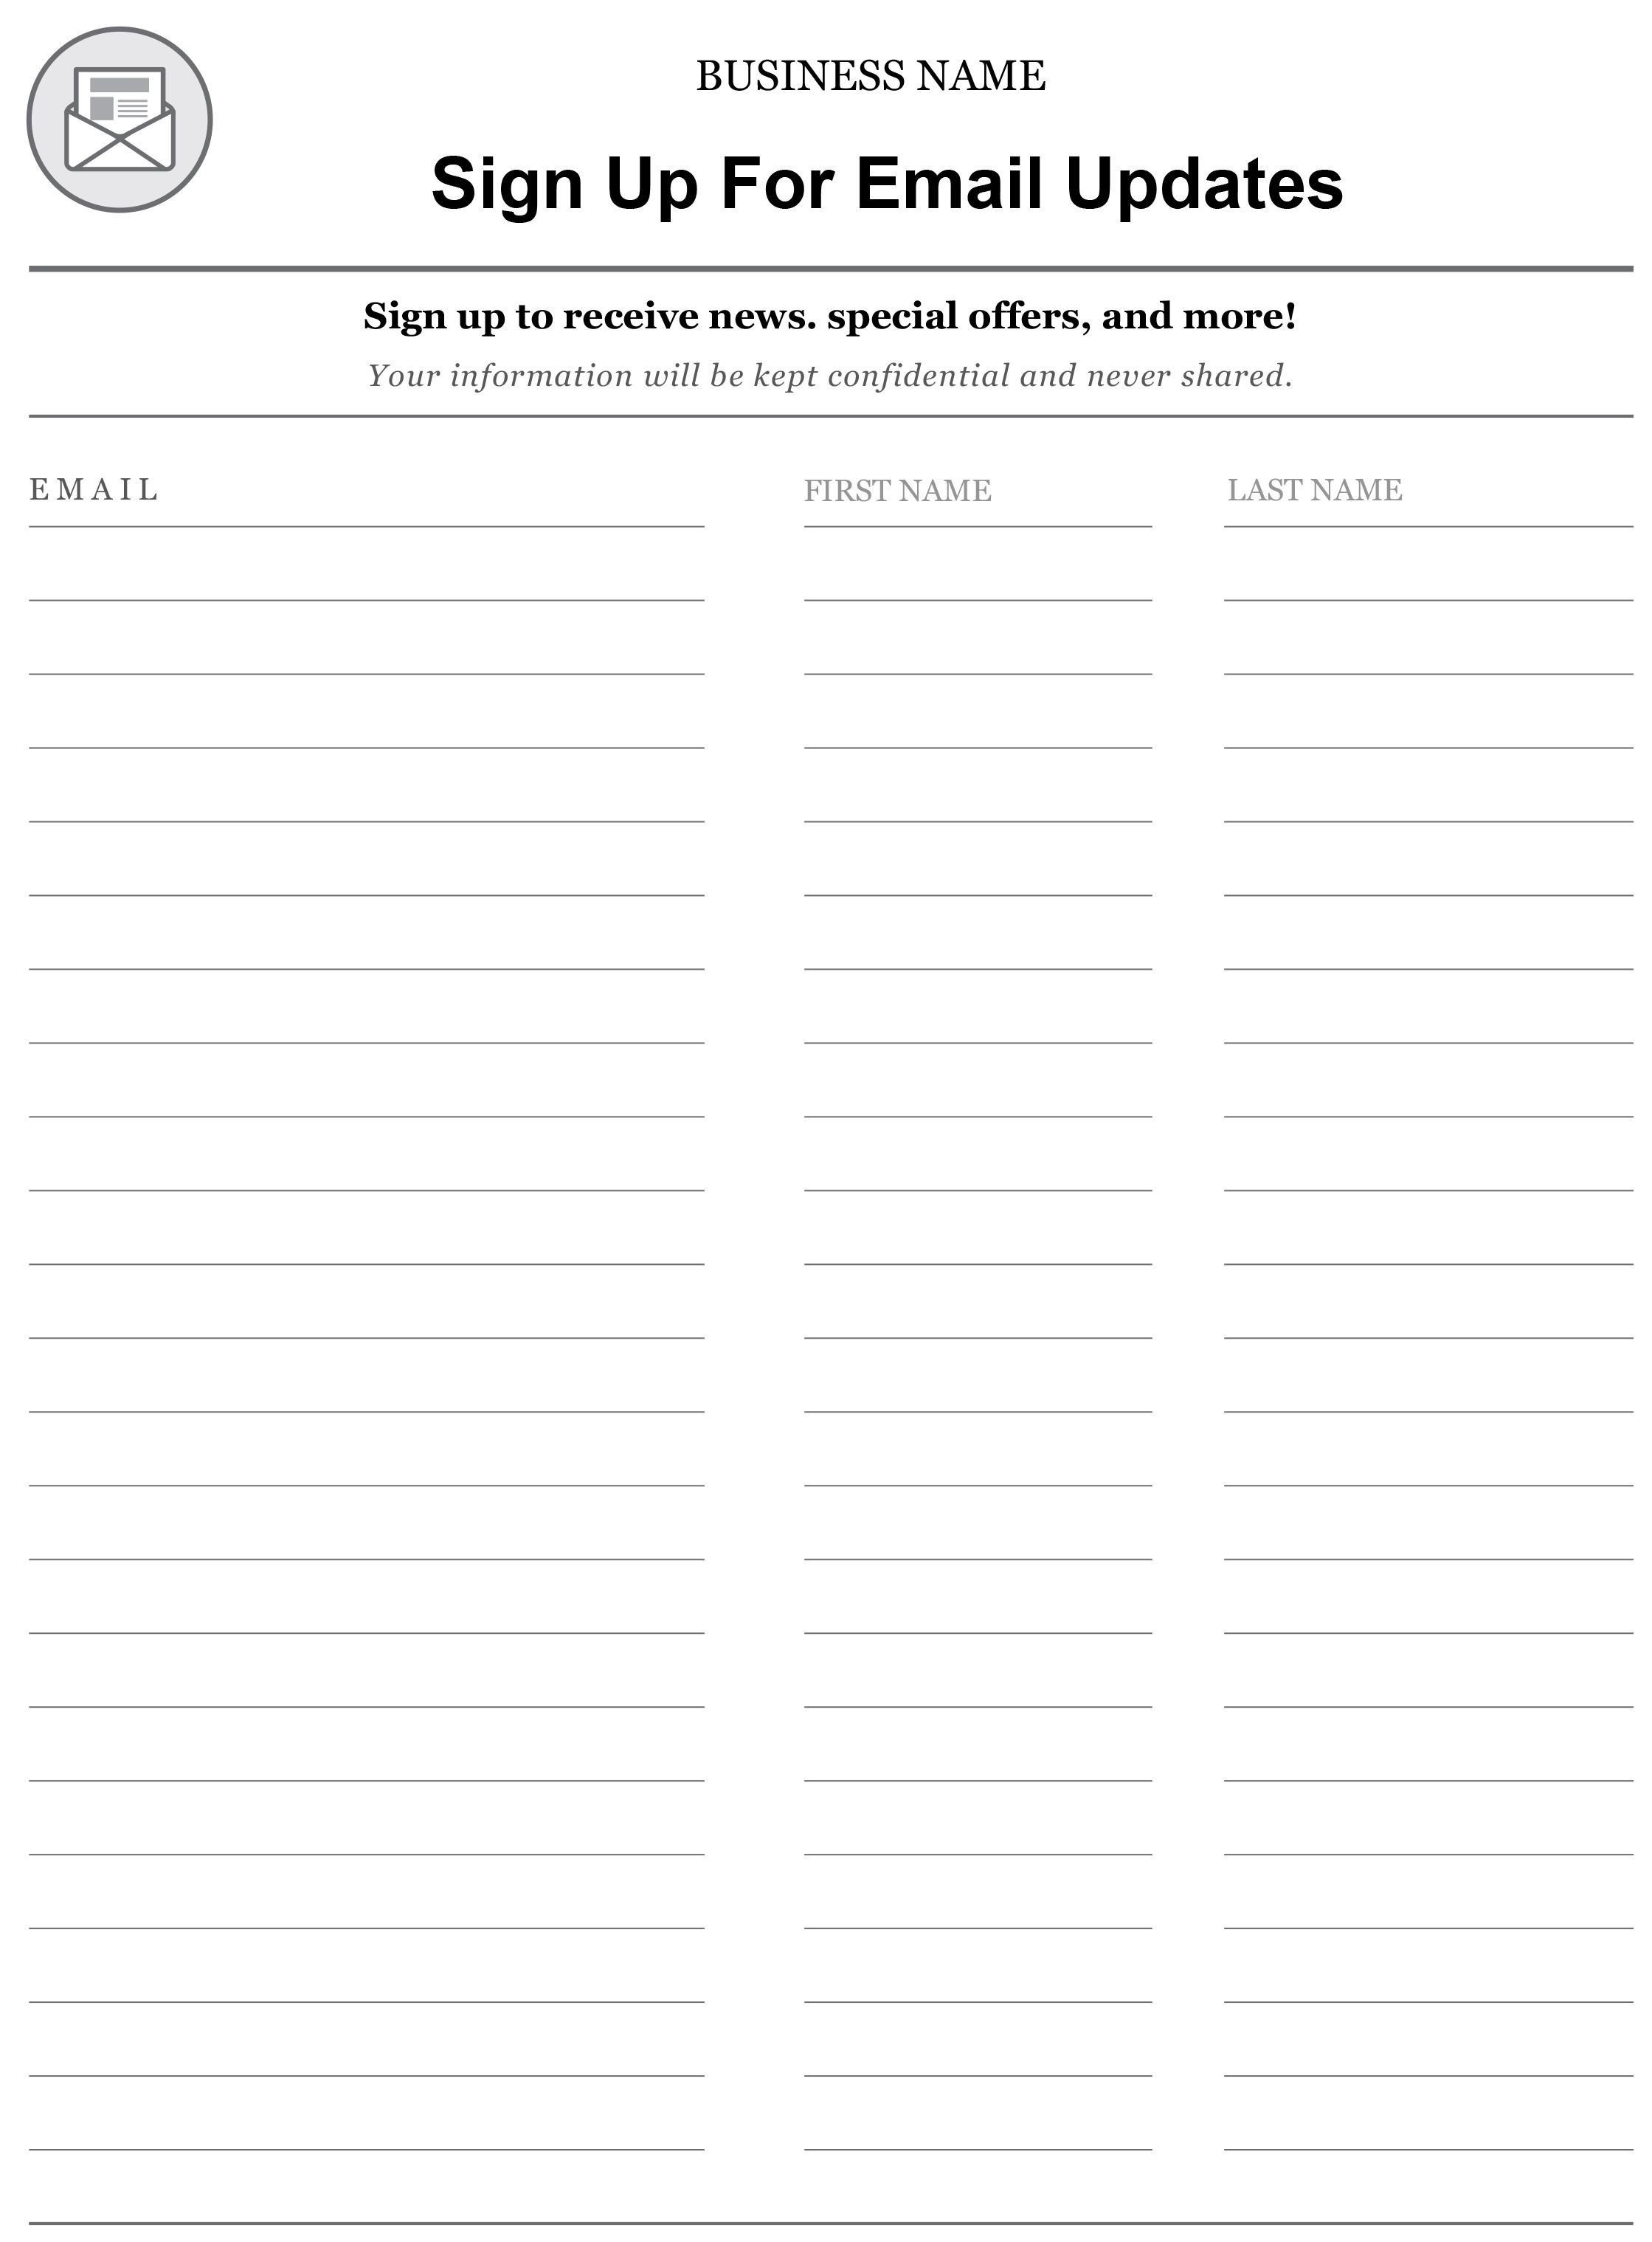 Email Signup Sheet Template Pin by Constant Contact On Email Marketing Tips and Best